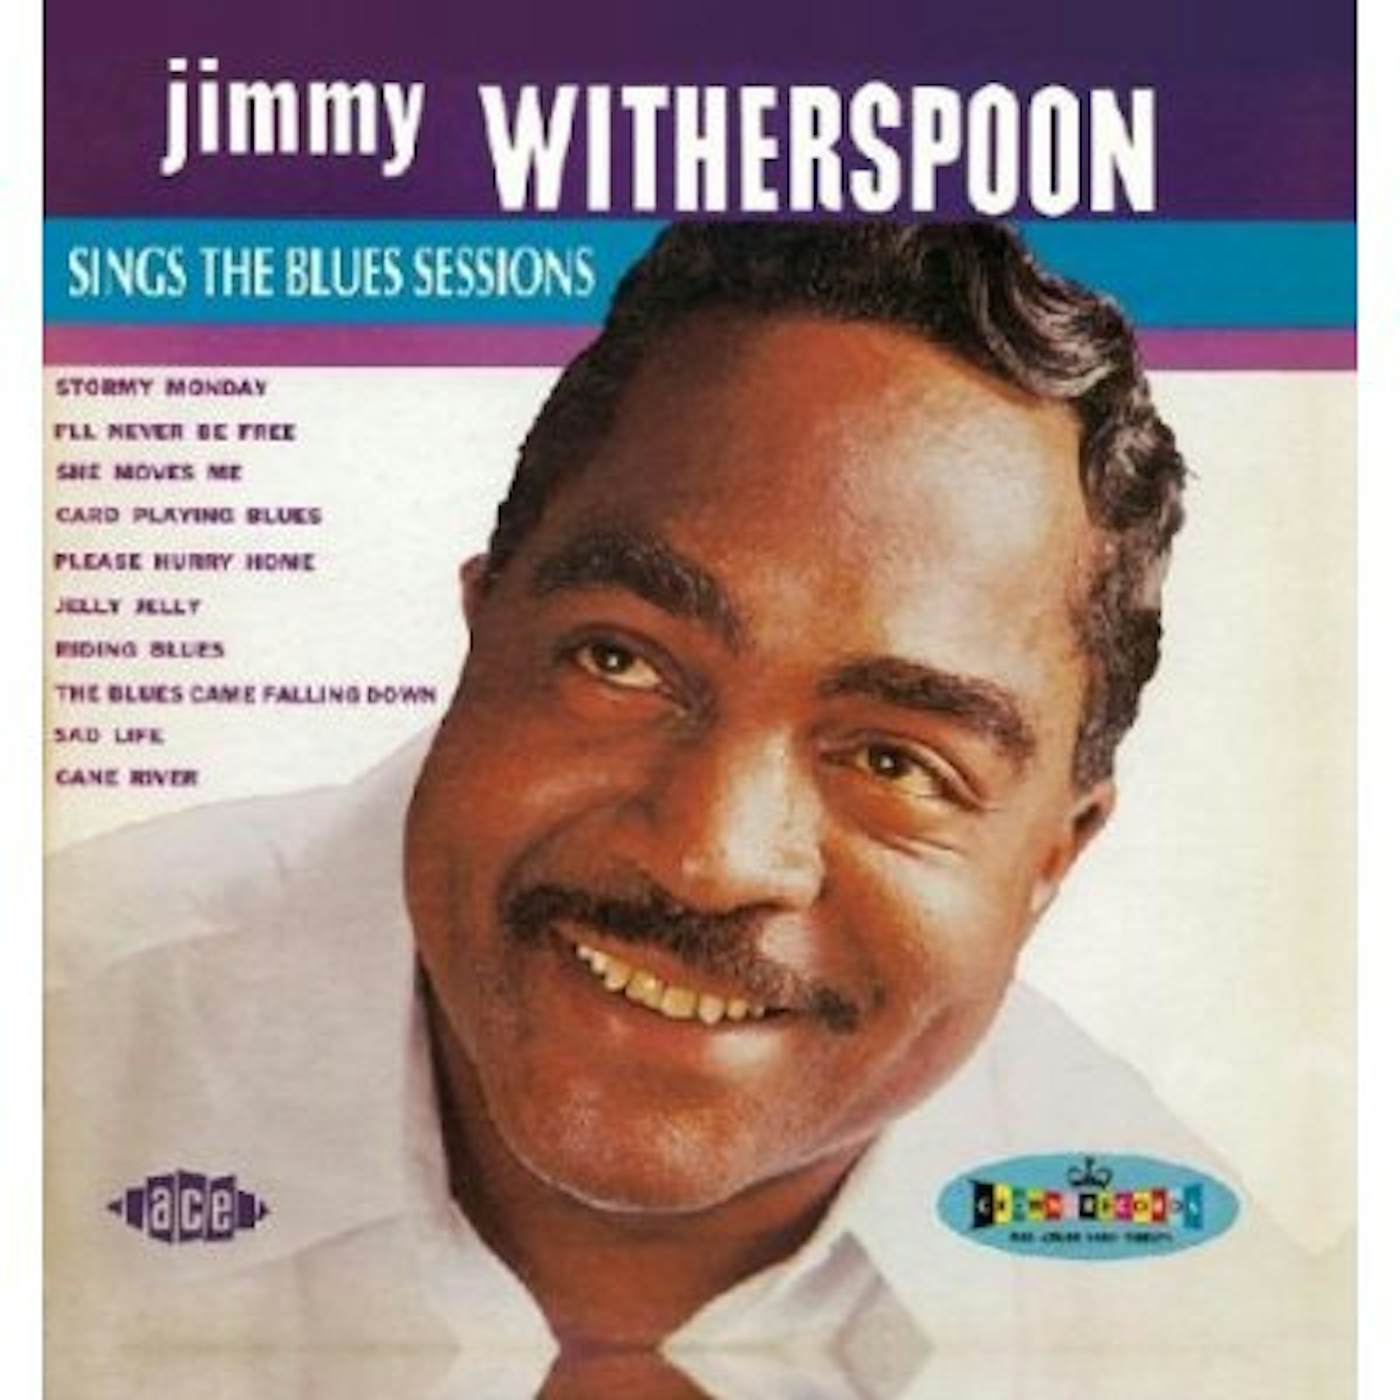 Jimmy Witherspoon SINGS THE BLUES SESSIONS CD